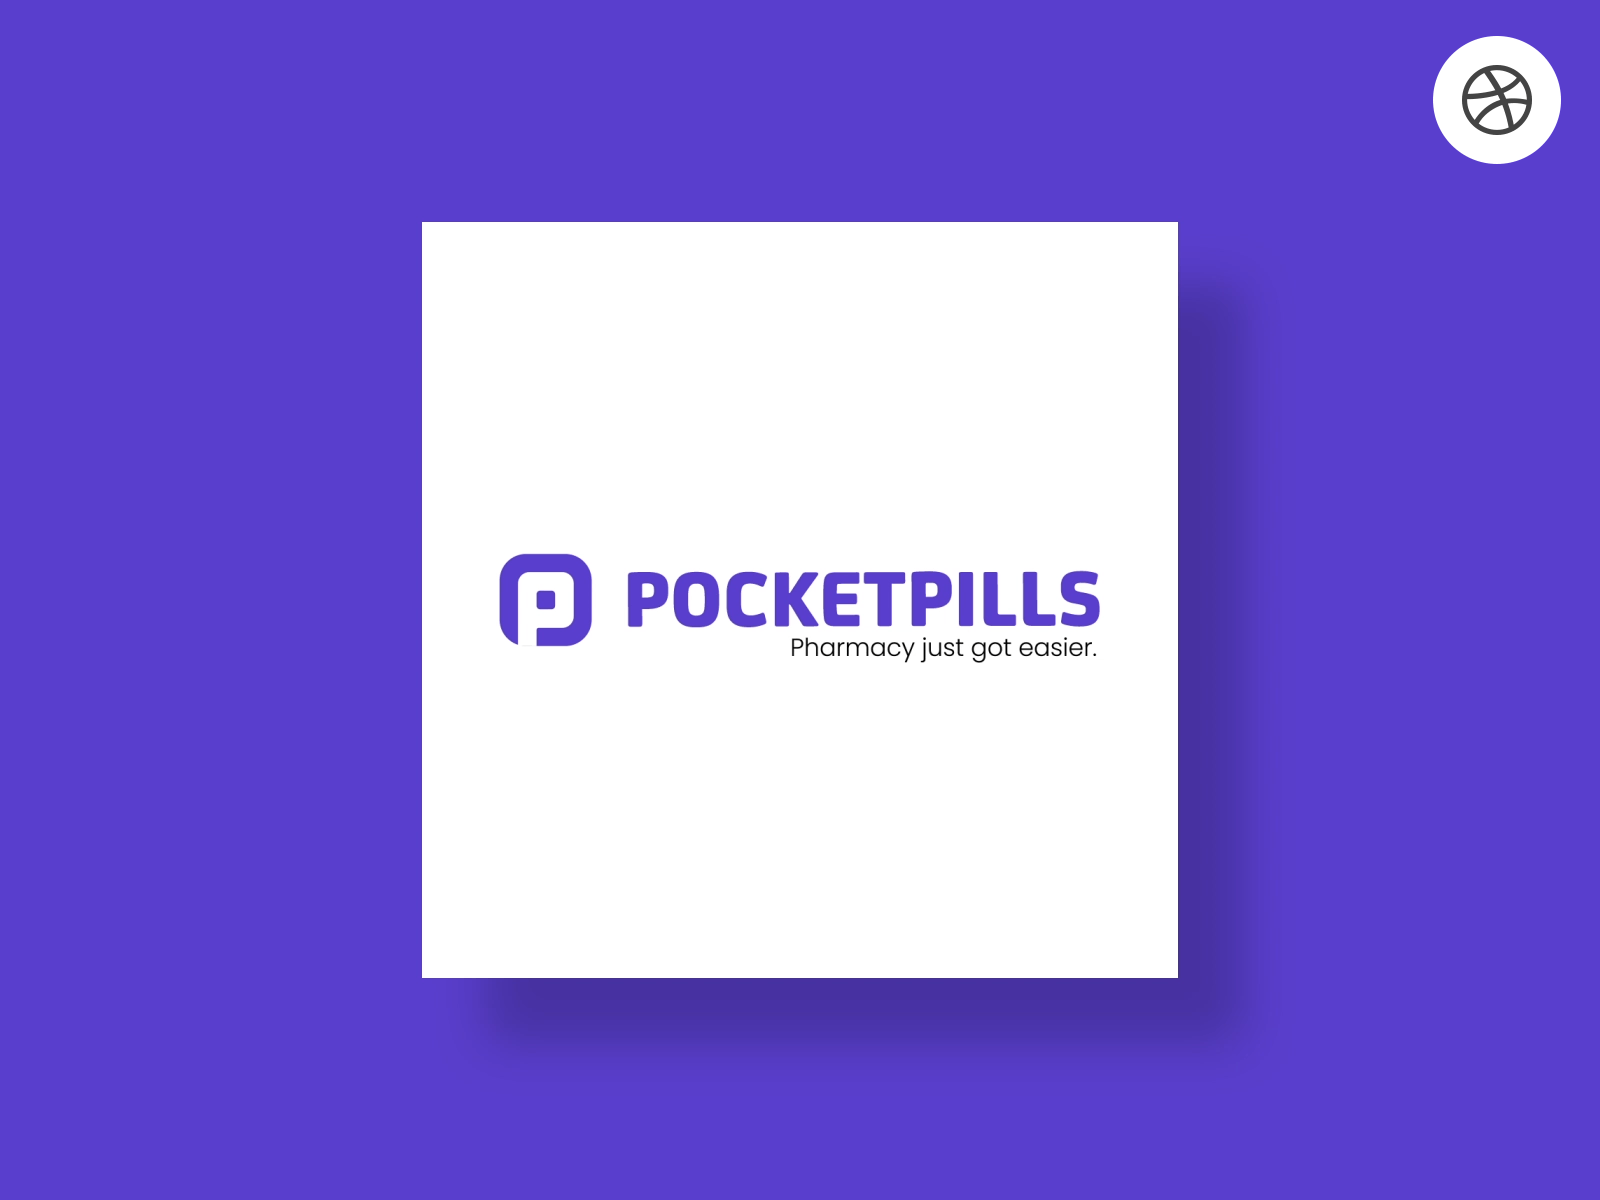 Creative strategy, art direction, design and animation for Online Pharmacy PocketPills